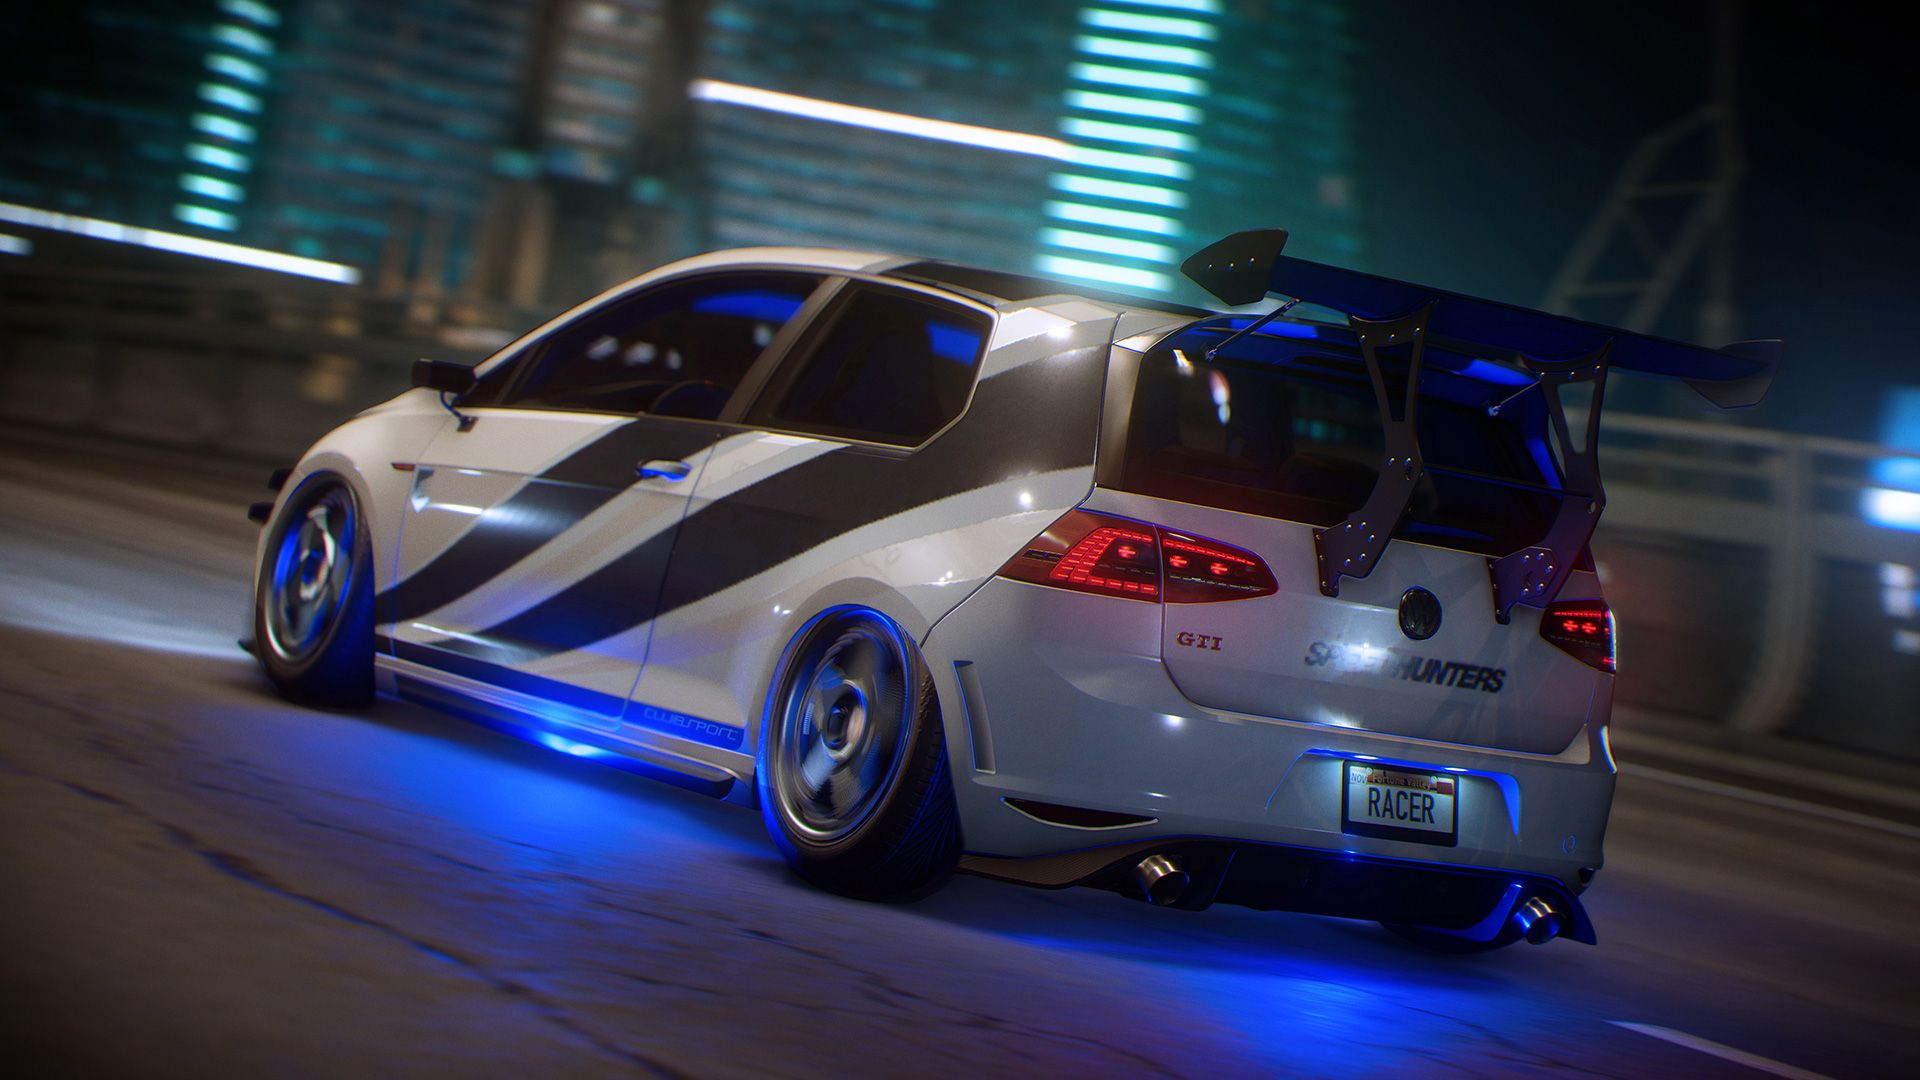 Need for Speed Payback 2020 Crack for PC Download [Updated Version]